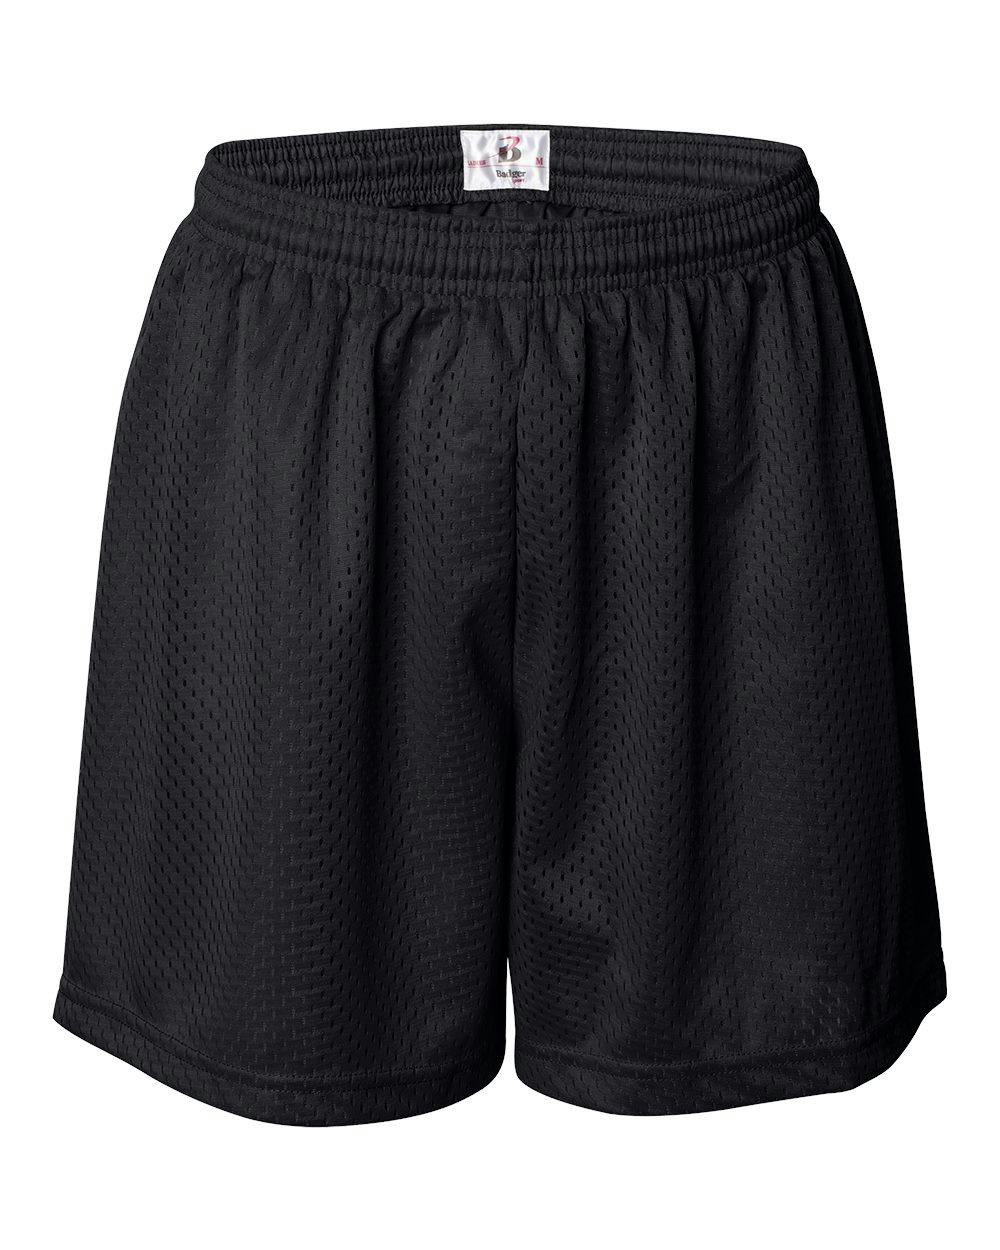 Image for Women's Pro Mesh 5" Shorts with Solid Liner - 7216